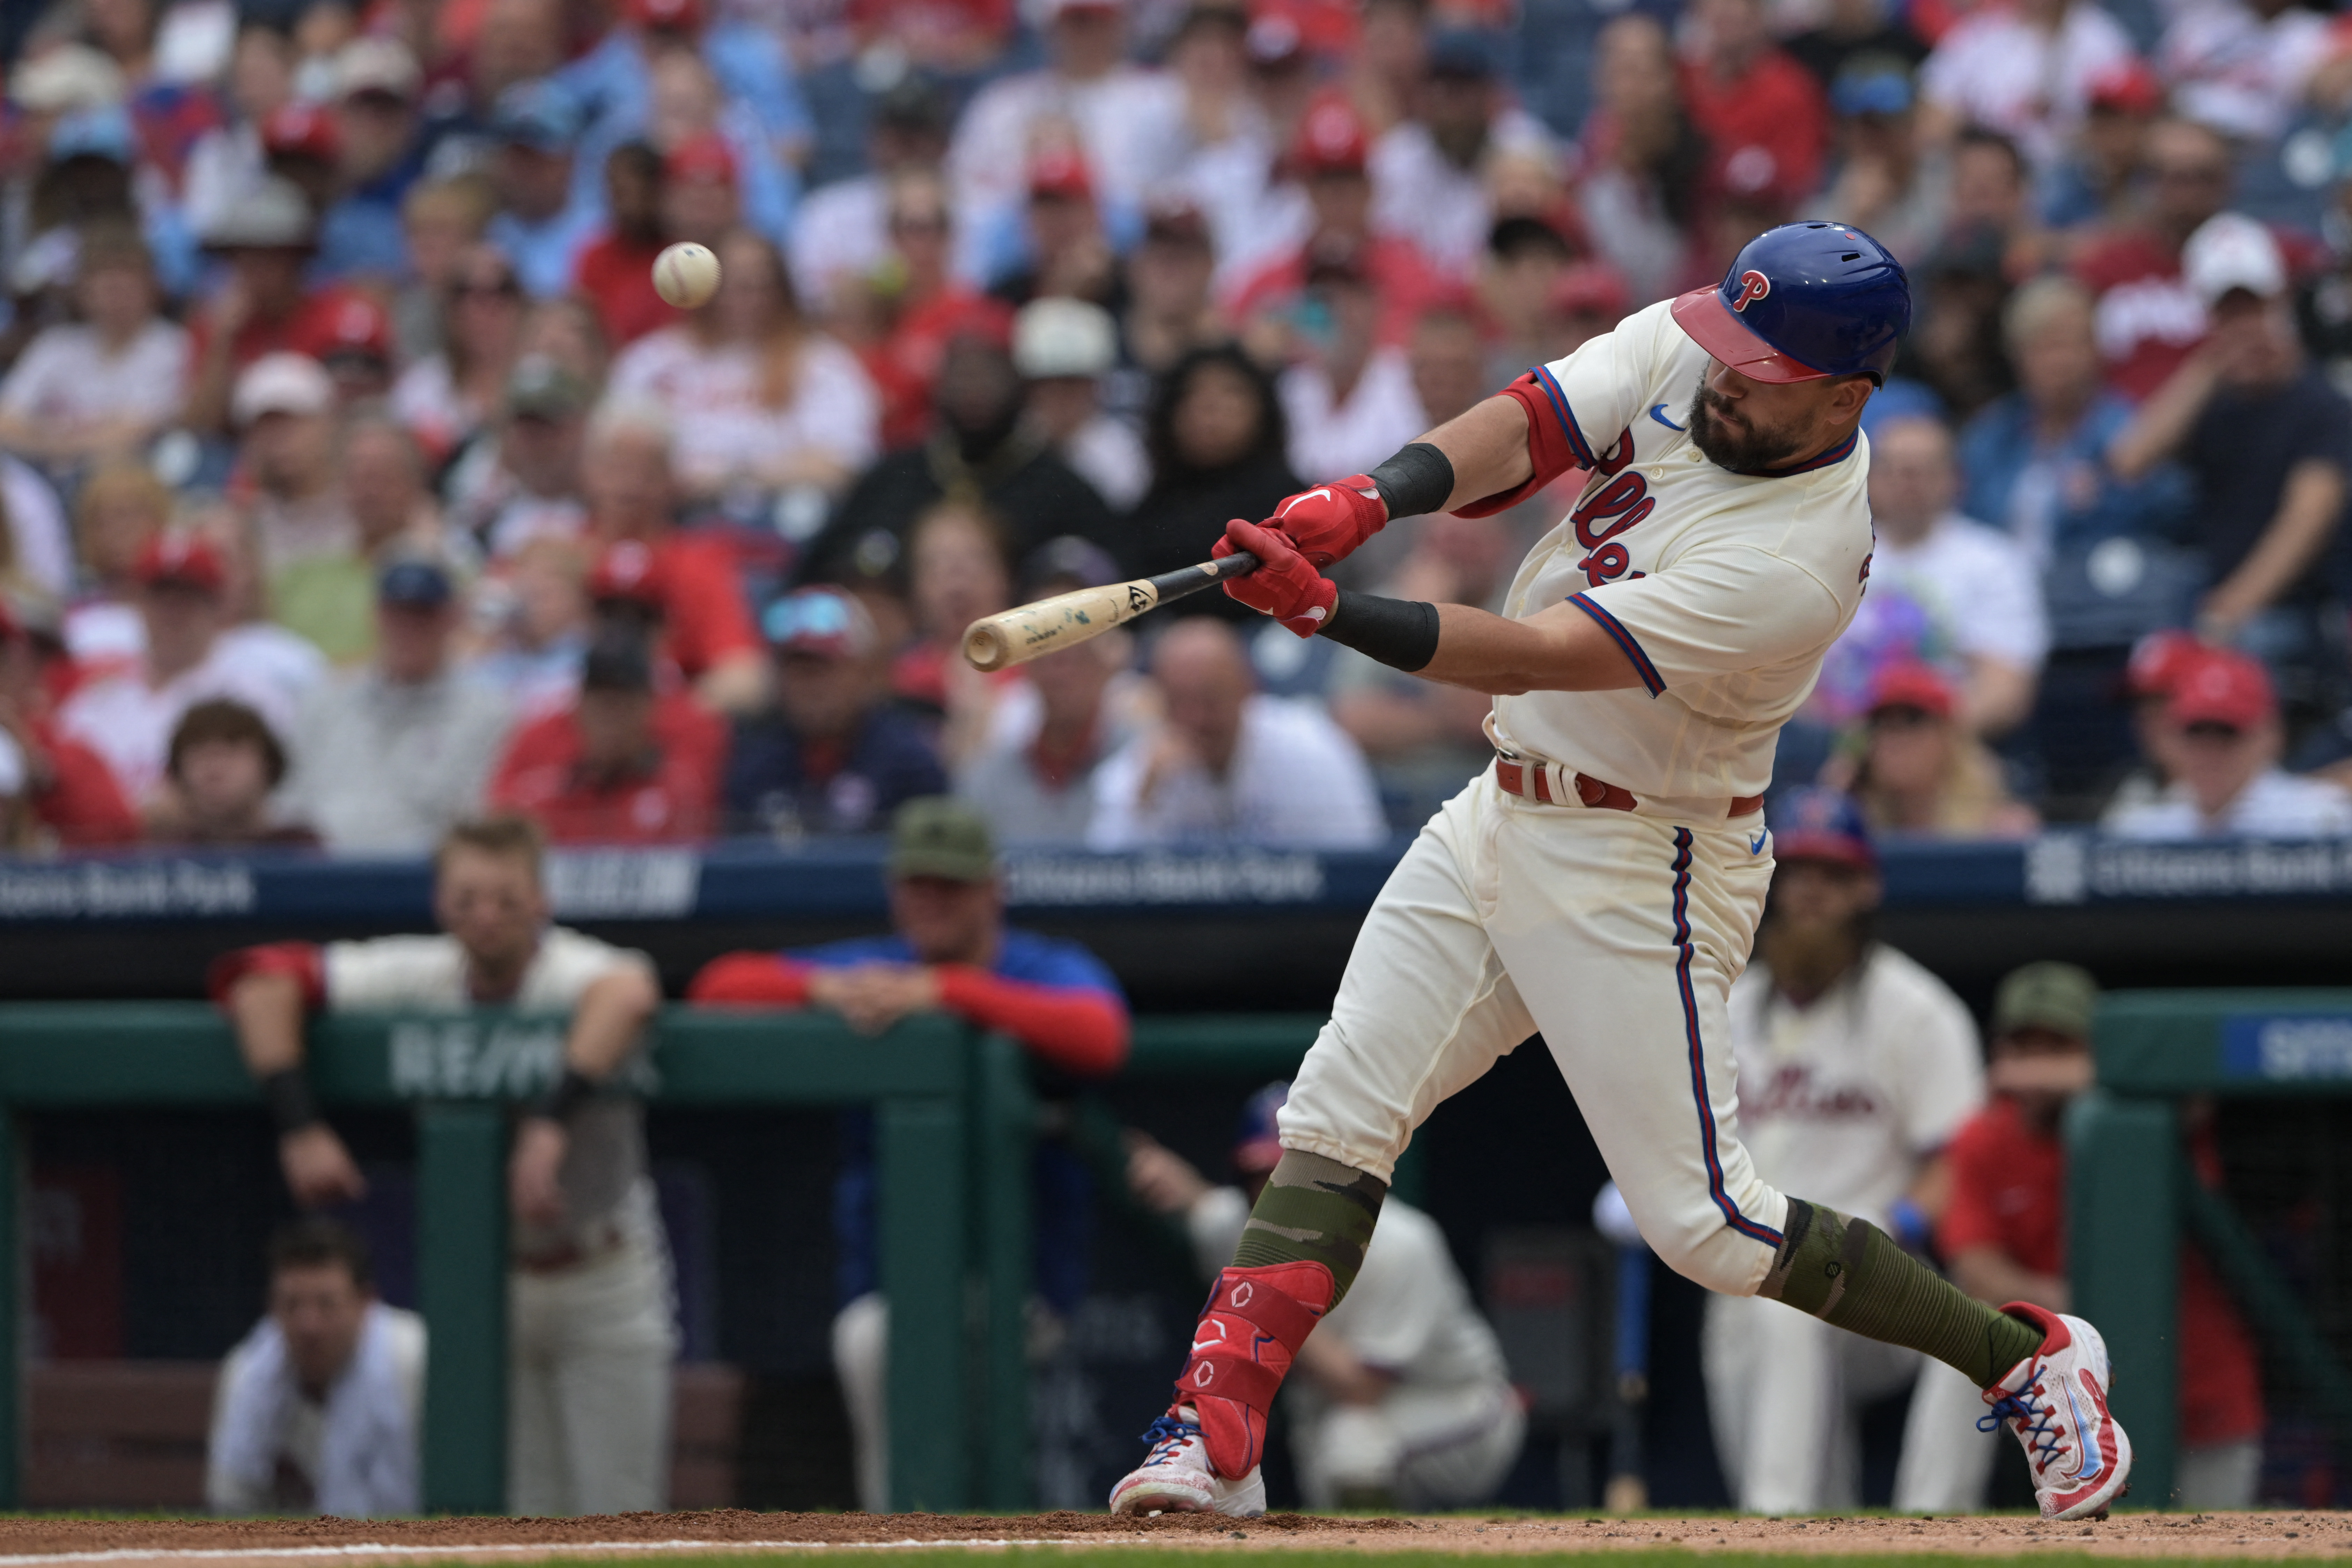 Kyle Schwarber's slam leads Phillies' rout over Cubs, 12-3